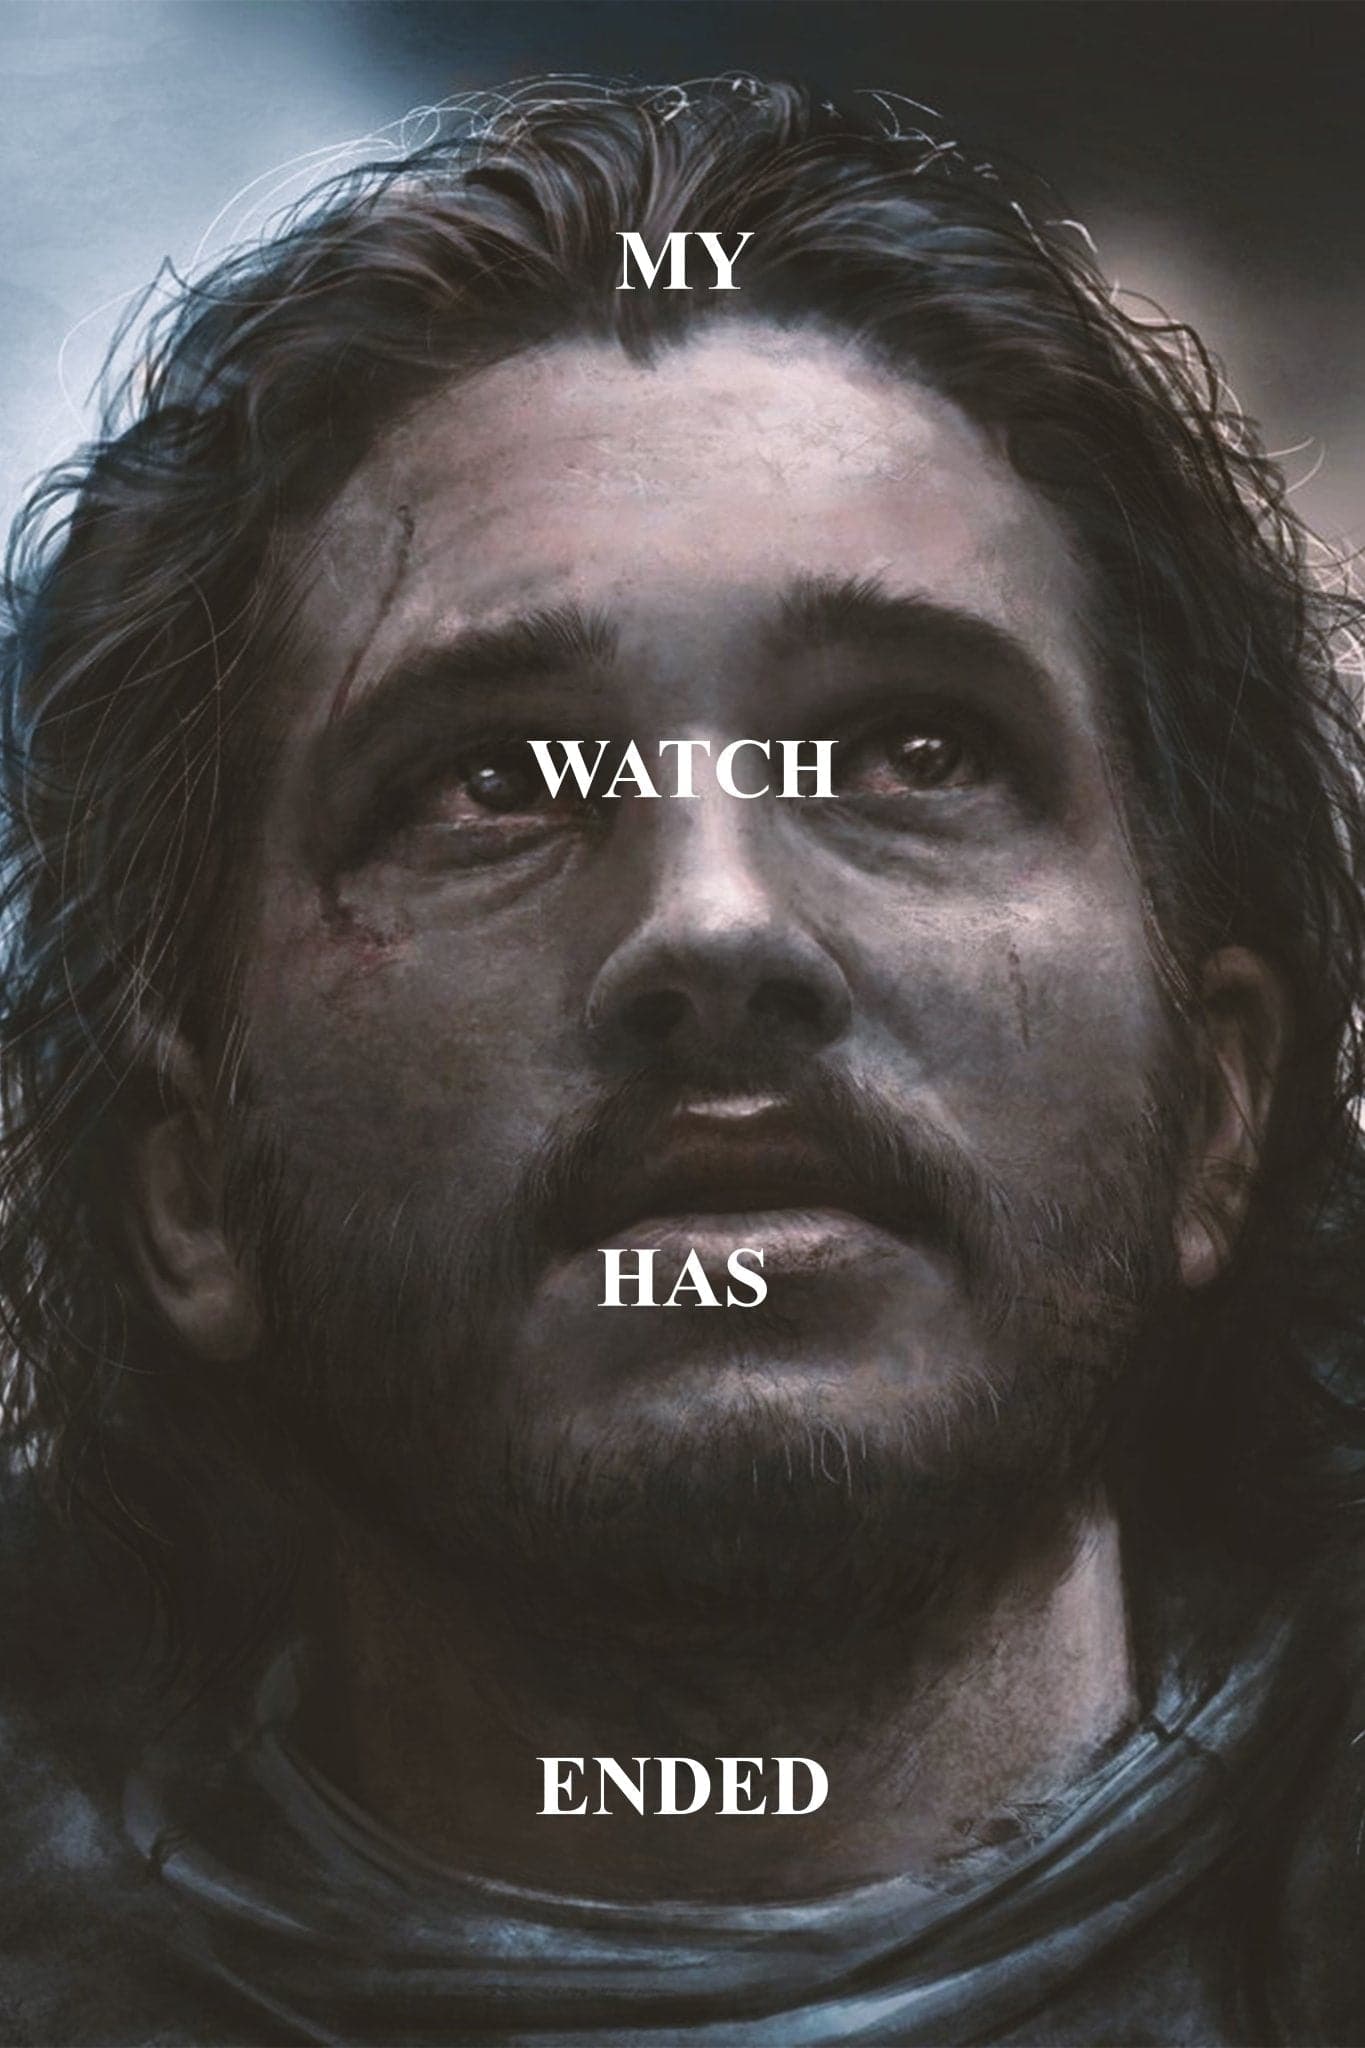 Harry Potter  Watch game of thrones, Game of thrones poster, Game